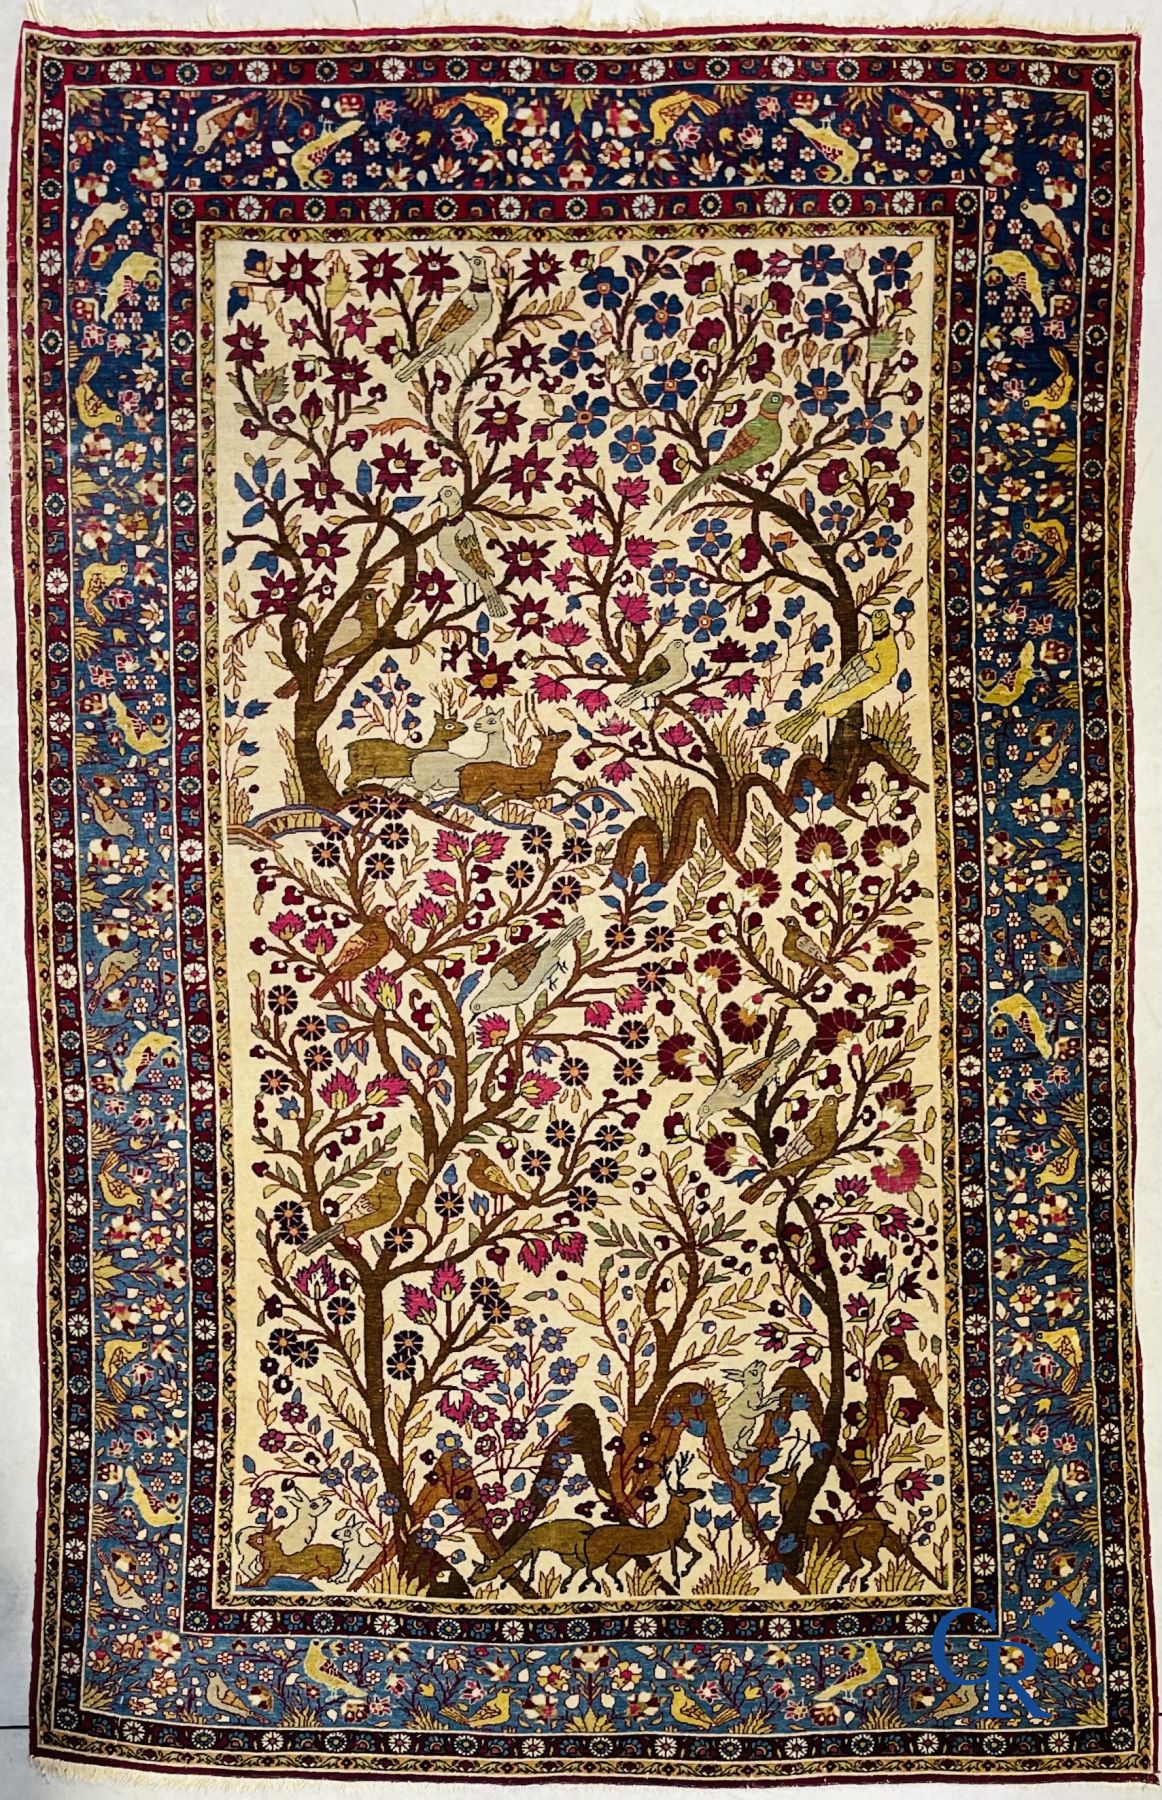 Oriental carpets: Antique oriental carpet with a decor of animals and birds in the forest. - Image 2 of 10